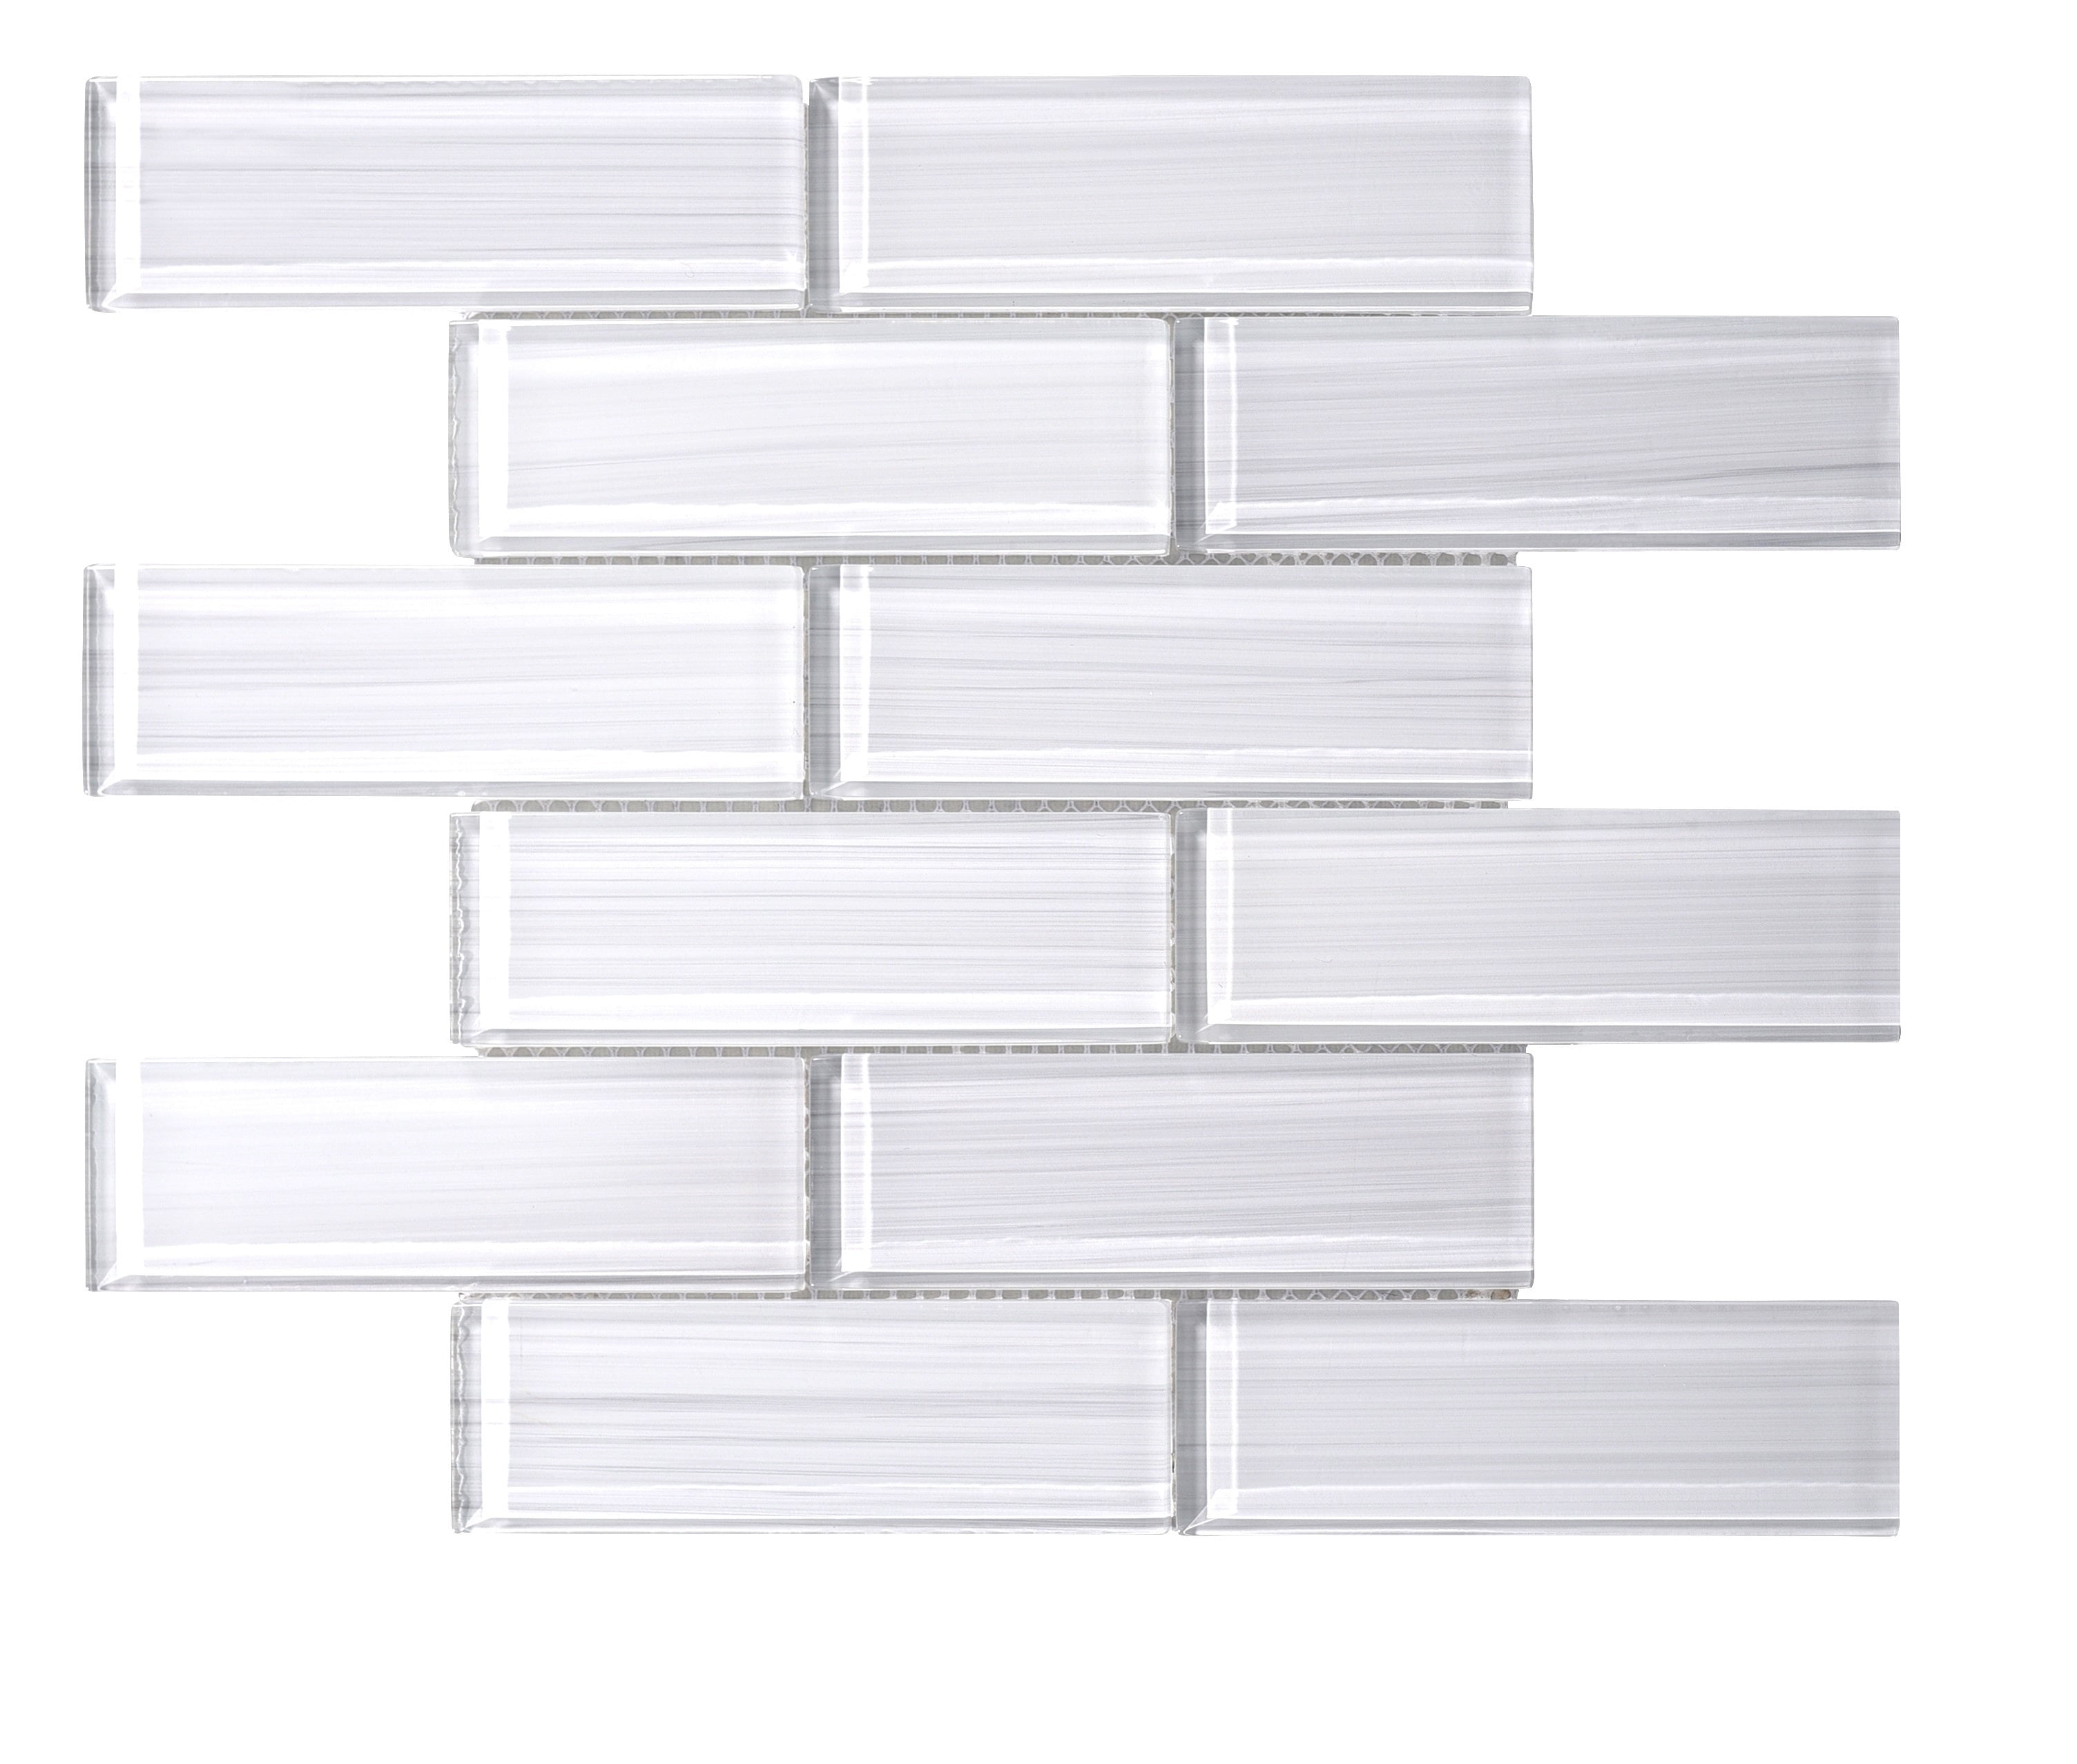 WS Tiles Hand Painted White 2 in. x 6 in. Glass Subway 12 in. x 12 in. MeshBacked Wall Tile